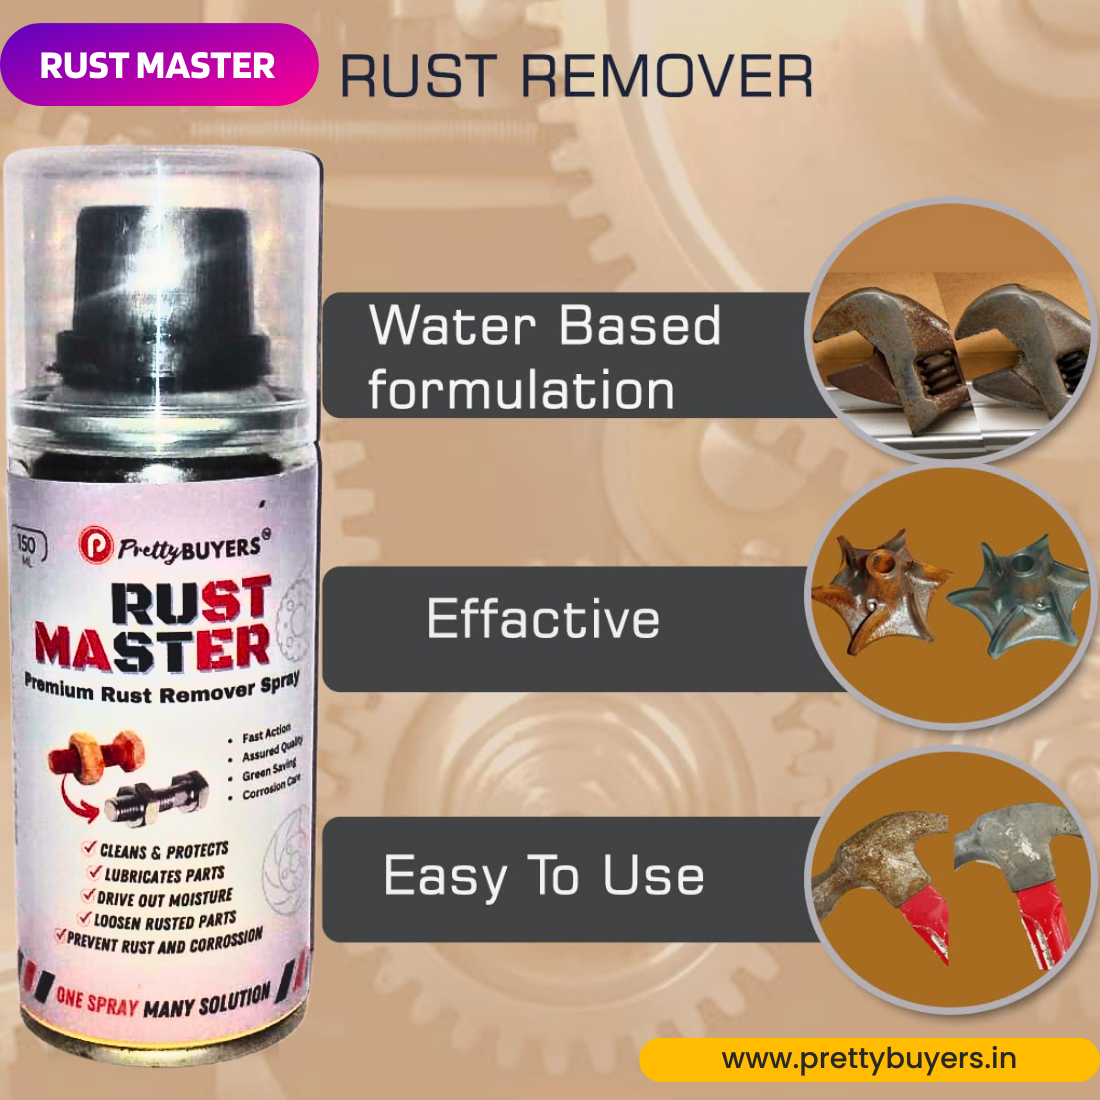 PrettyBUYERS RUST Master - Instant Rust Remover Spray (150 mlx5) | Removes Rust | Protects from Corrosion